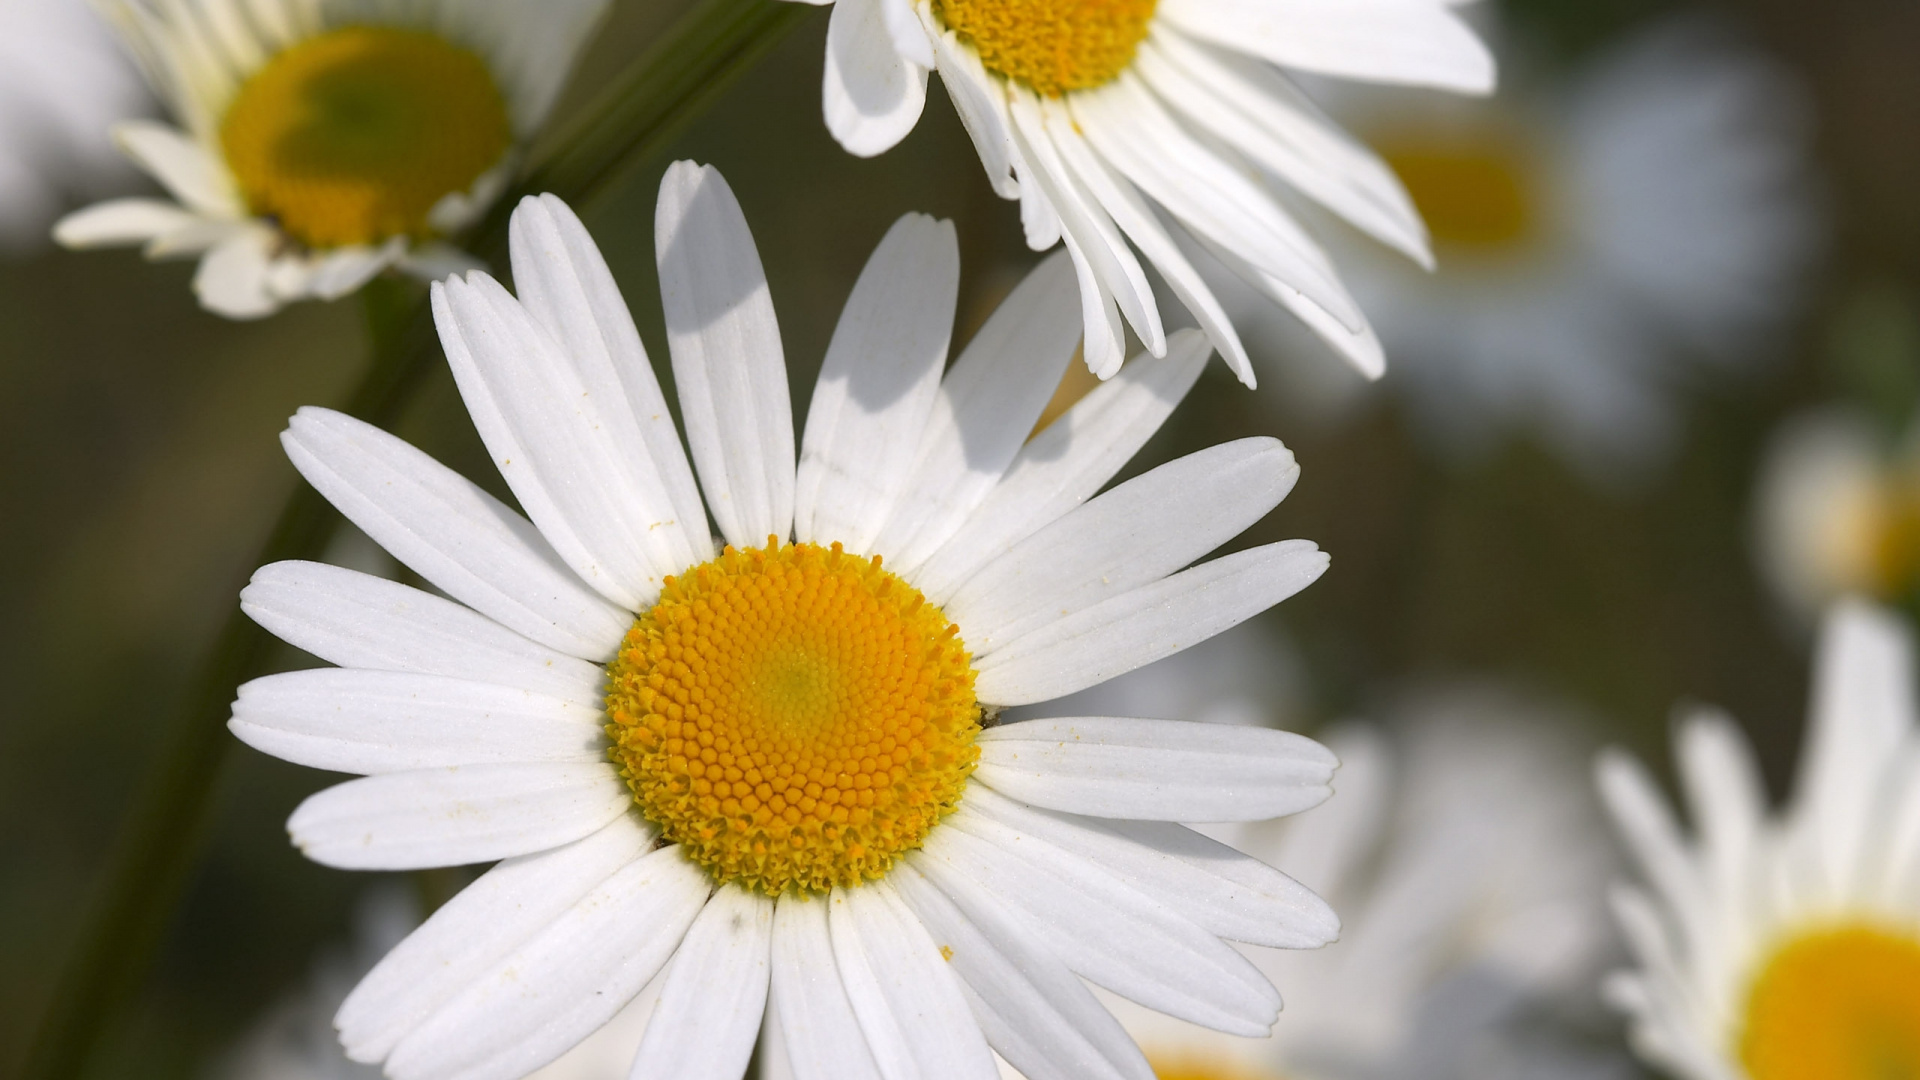 White Daisy in Bloom During Daytime. Wallpaper in 1920x1080 Resolution